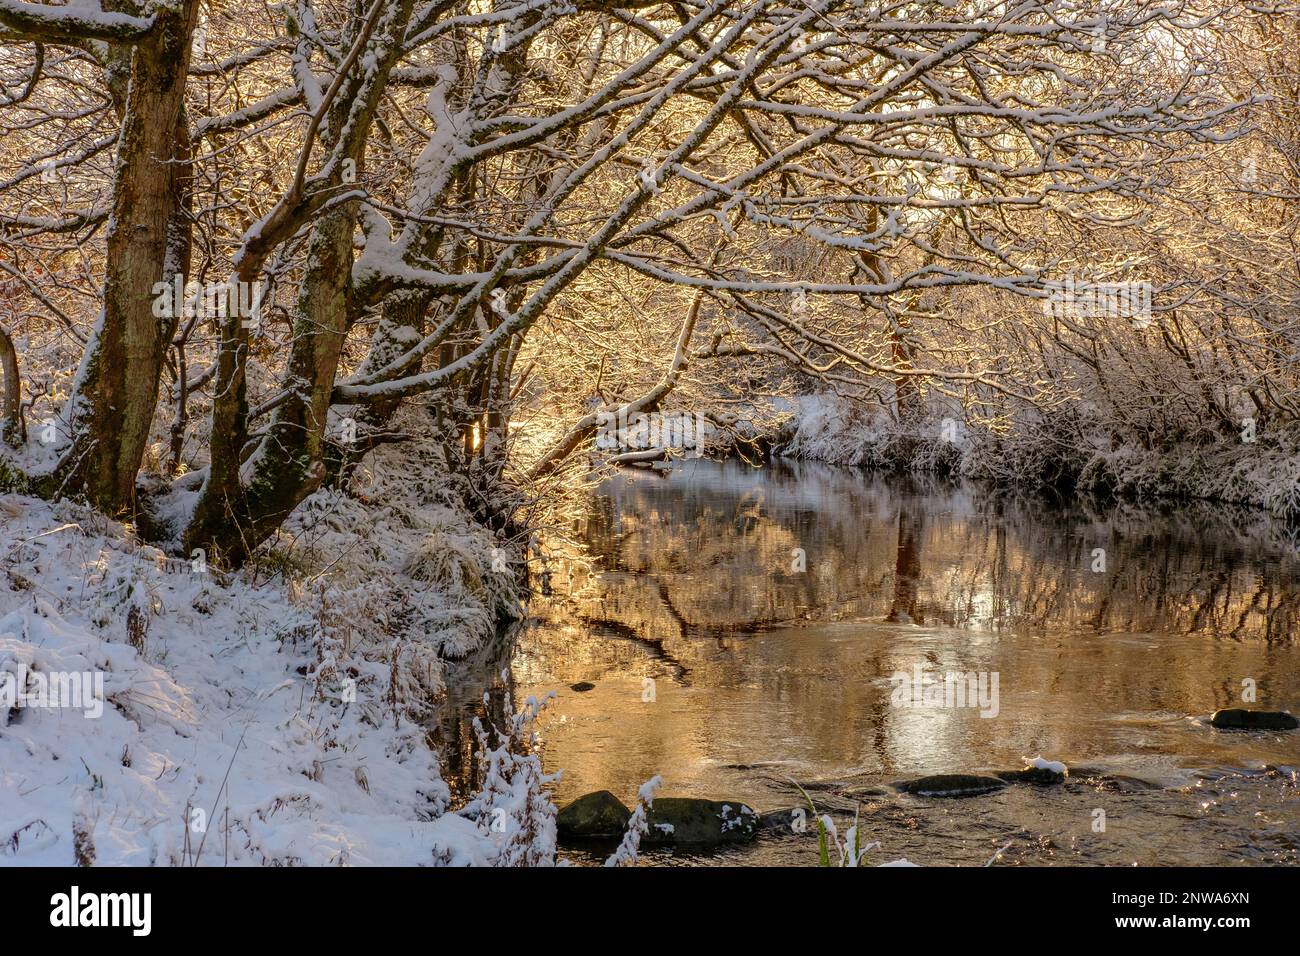 Snow scene with warm sunlight on winter landscape with snowy riverbank. River Derwent  at Allensford County Durham Stock Photo